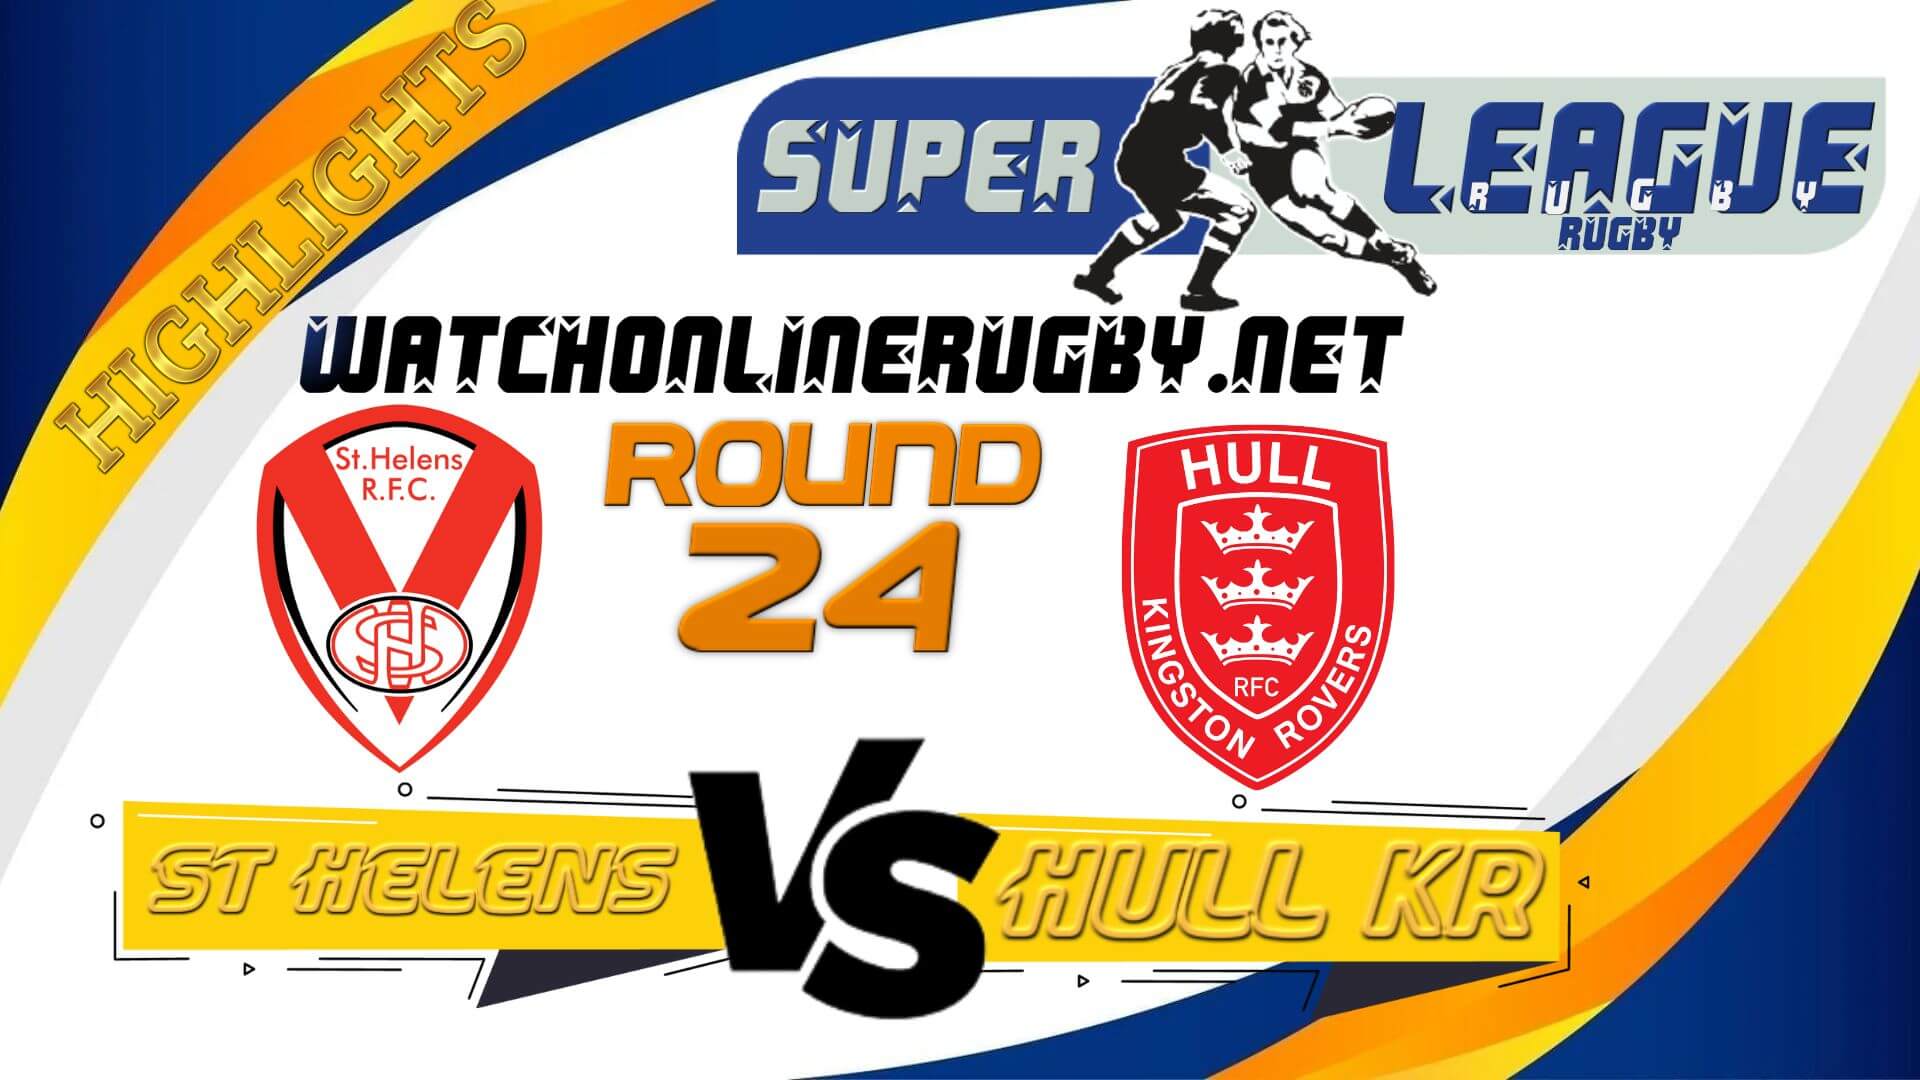 St Helens Vs Hull KR Super League Rugby 2022 RD 24